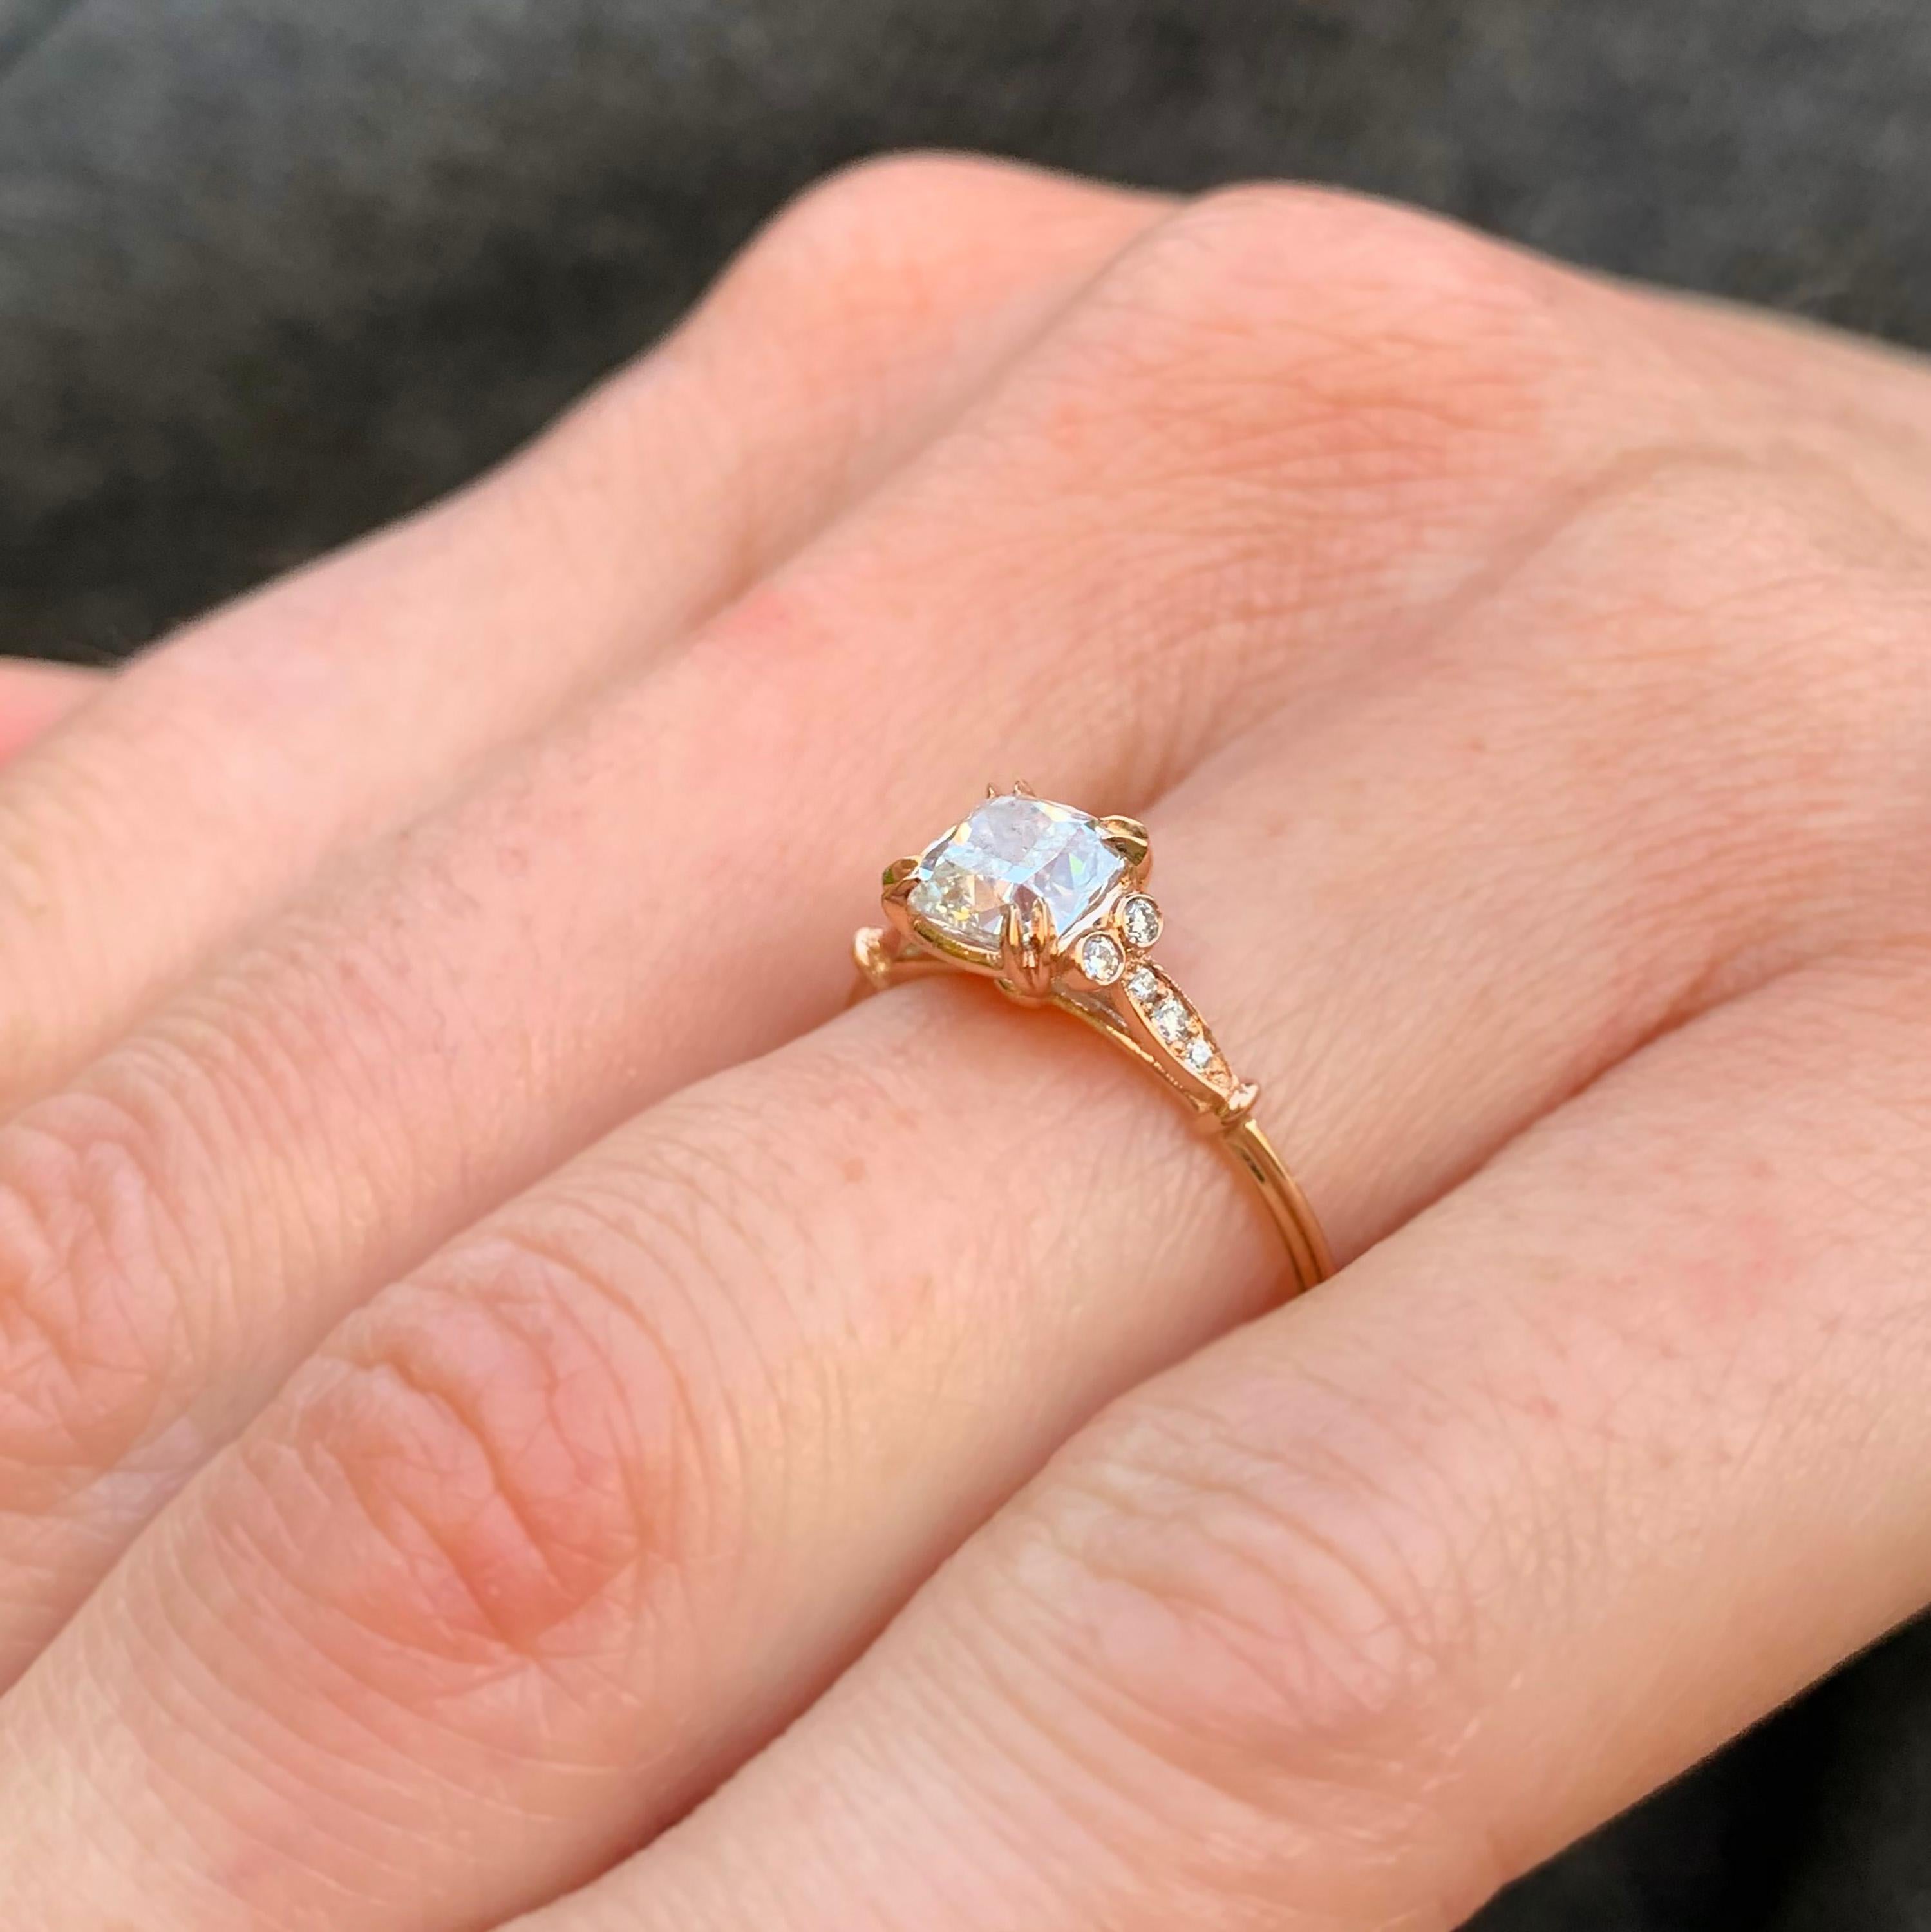 Hand crafted in 18k rose gold a perfectly unique diamond engagement ring. A signature Ronan Campbell design crafted in rose gold and set with a beautiful cushion cut diamond (1.01ct F VS2 GIA)